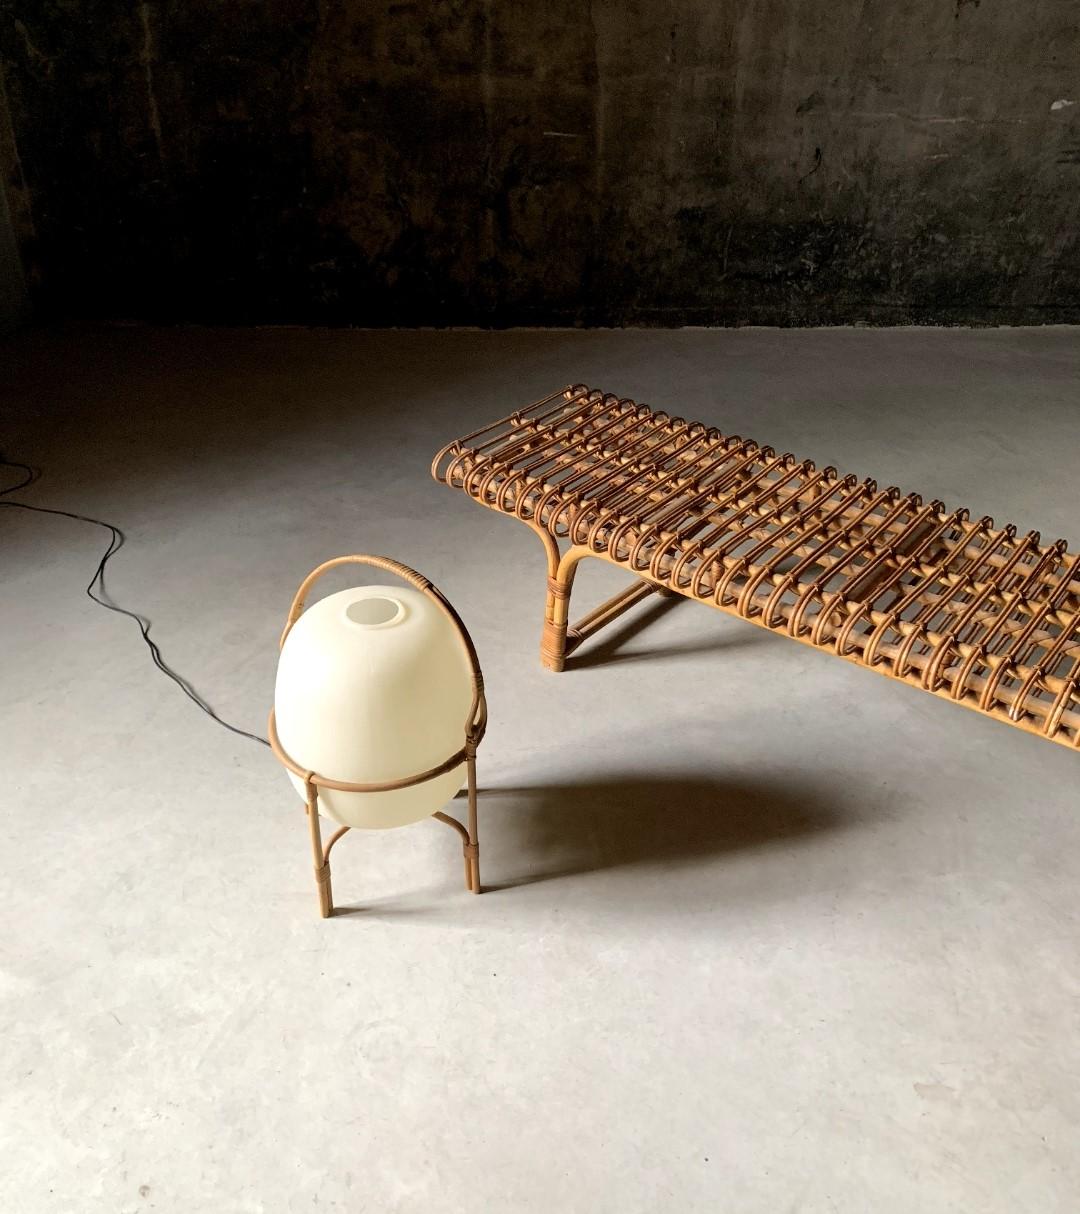 Wicker Rarest and Documented Rattan Bench by Joaquim Belsa, Spain, 1962